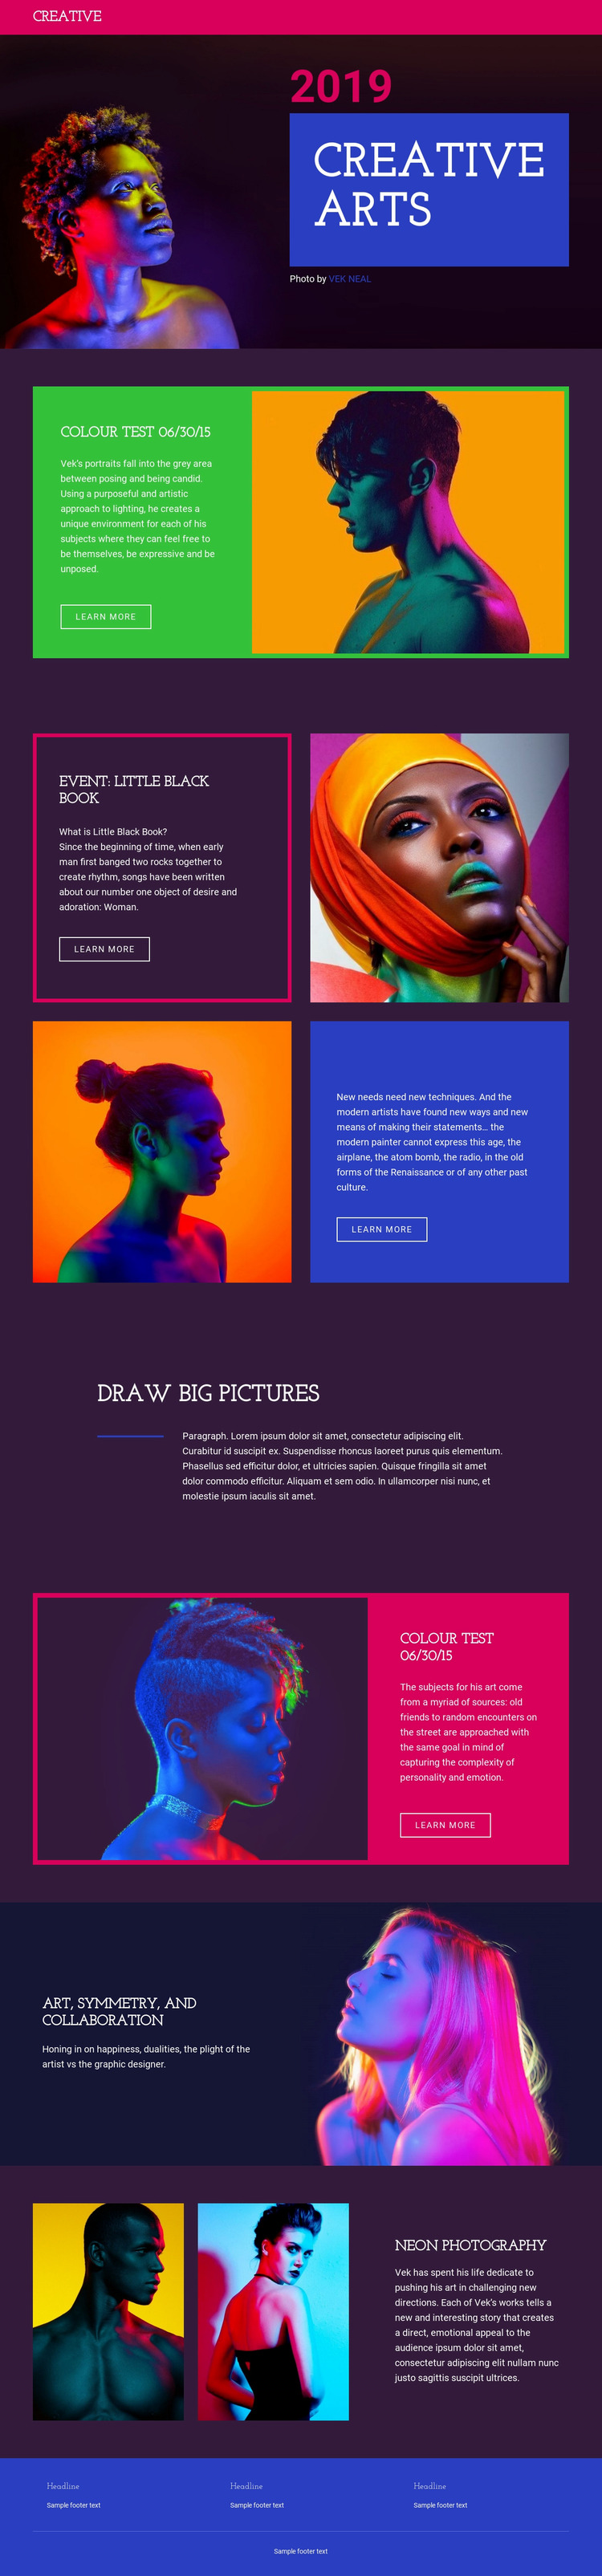 Limited-edition photography Website Mockup